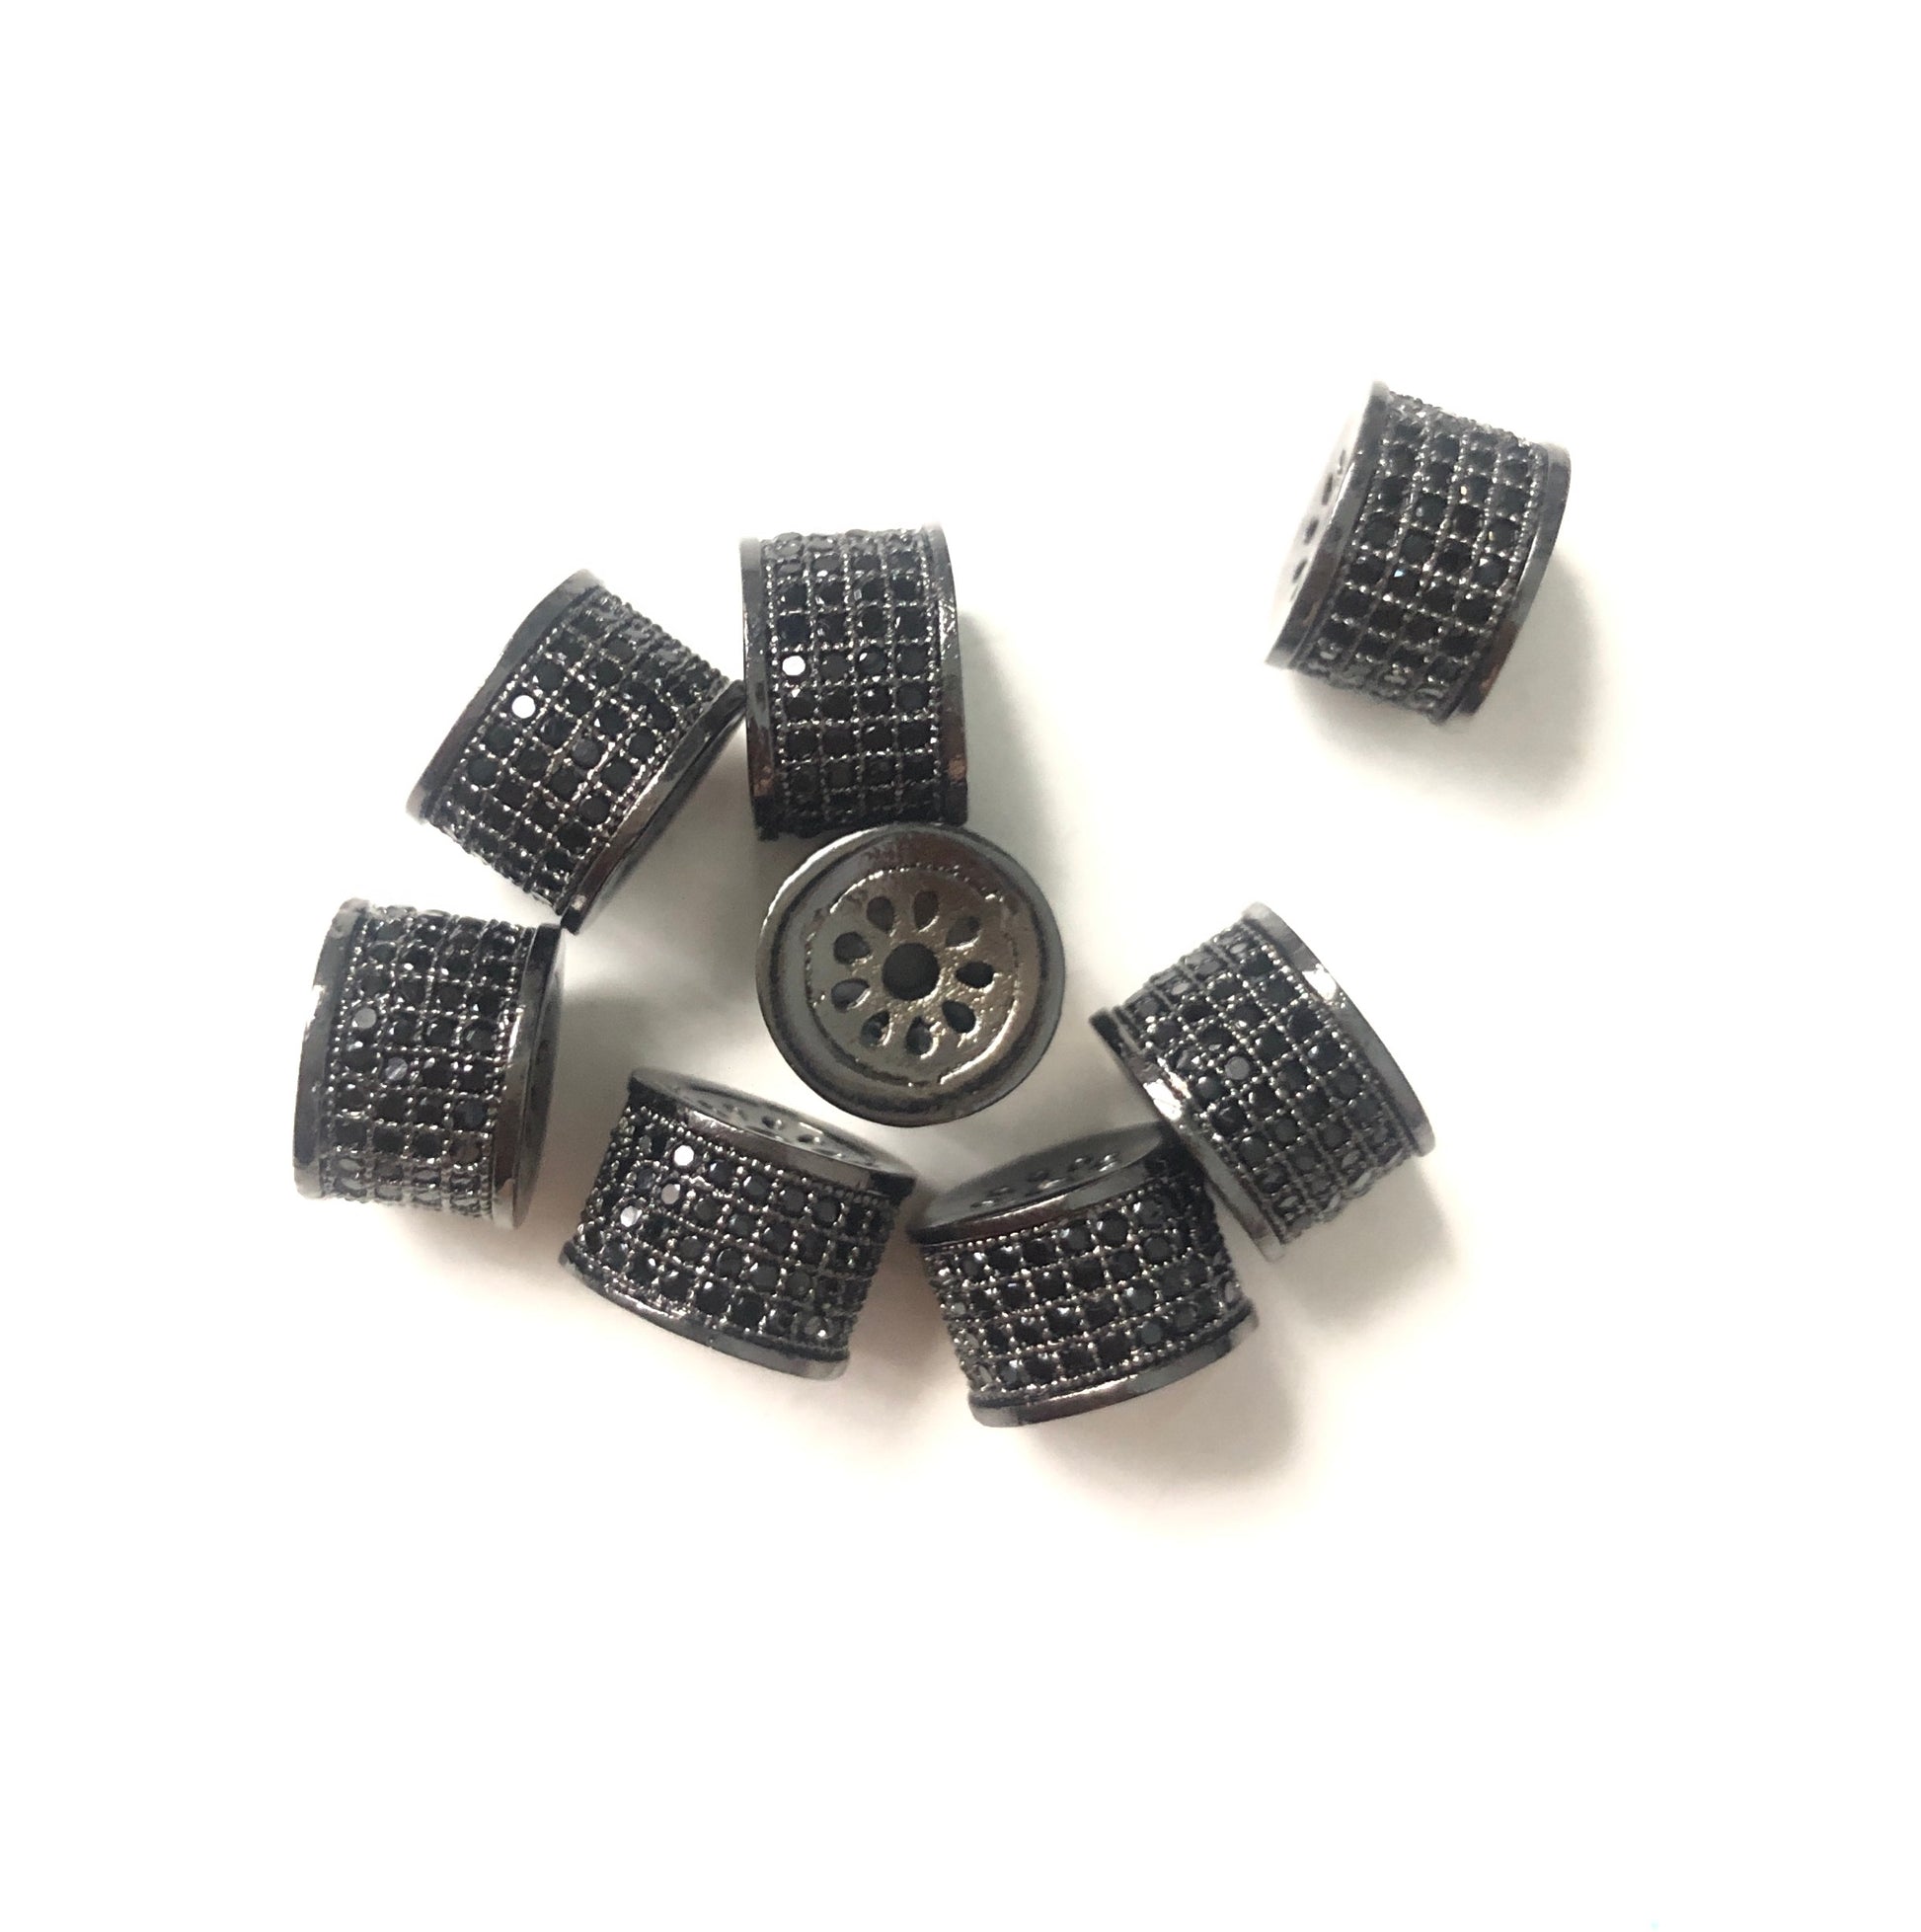 10pcs/lot 9.5*6.5mm CZ Paved Cylinder Rondelle Spacers Black on Black CZ Paved Spacers Rondelle Beads Charms Beads Beyond